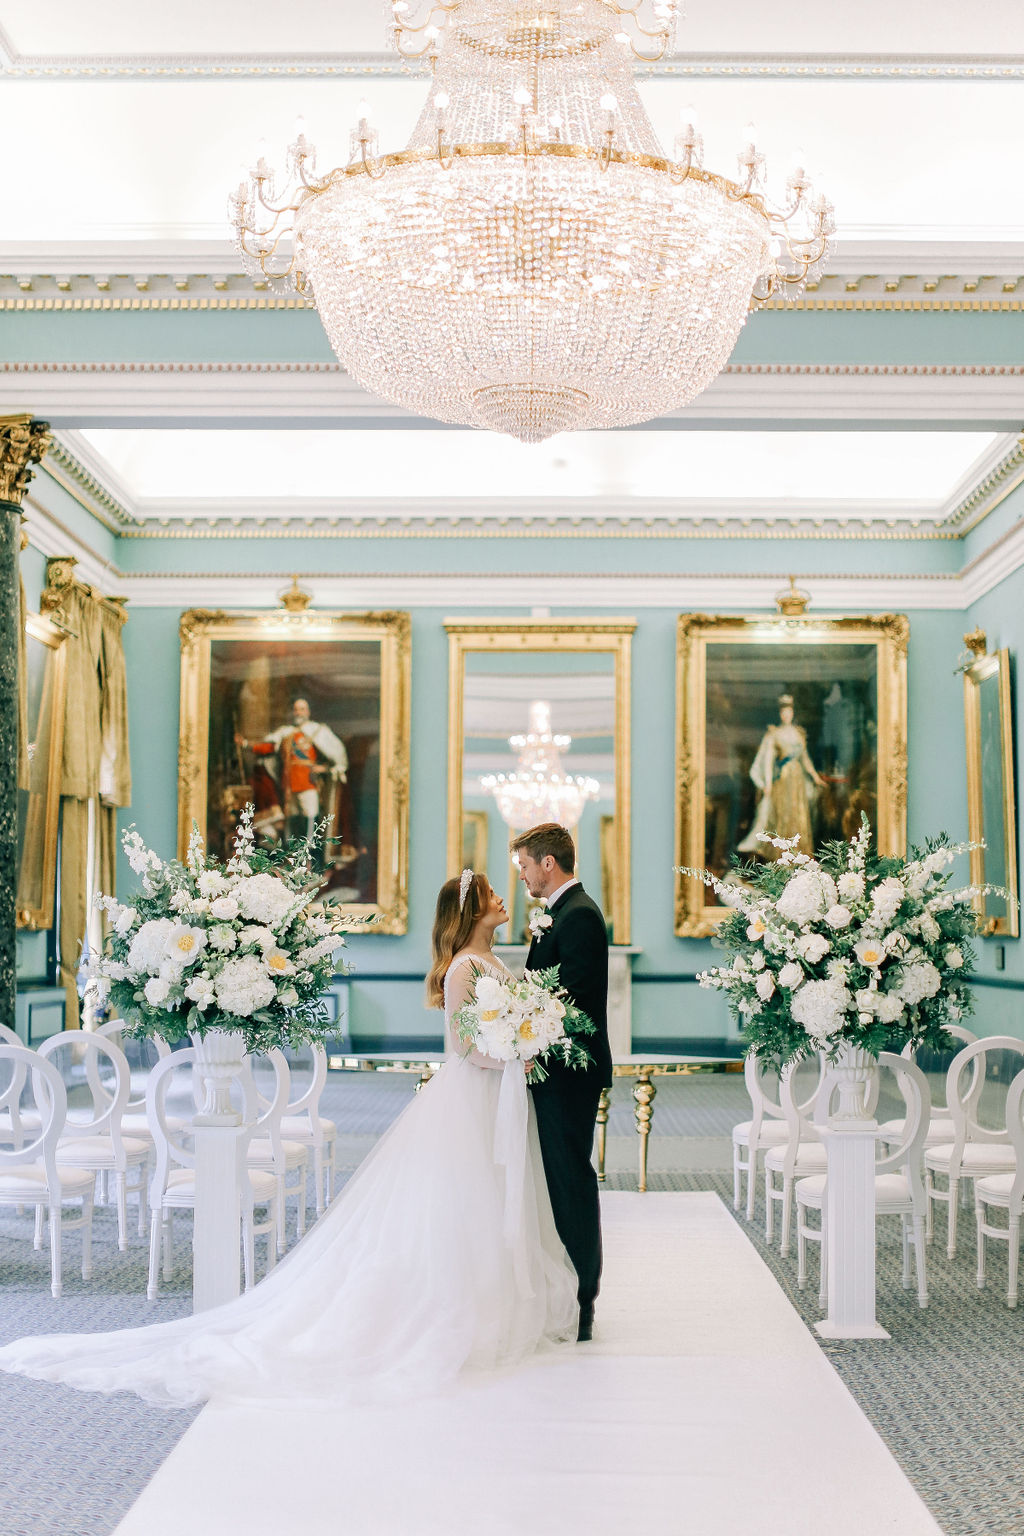 116 Pall Mall London wedding venue with wedding florist Flourish and Grace with Charlotte Wise Photography, chic mayfair london city venue, ceremony urns on plinths, nash room